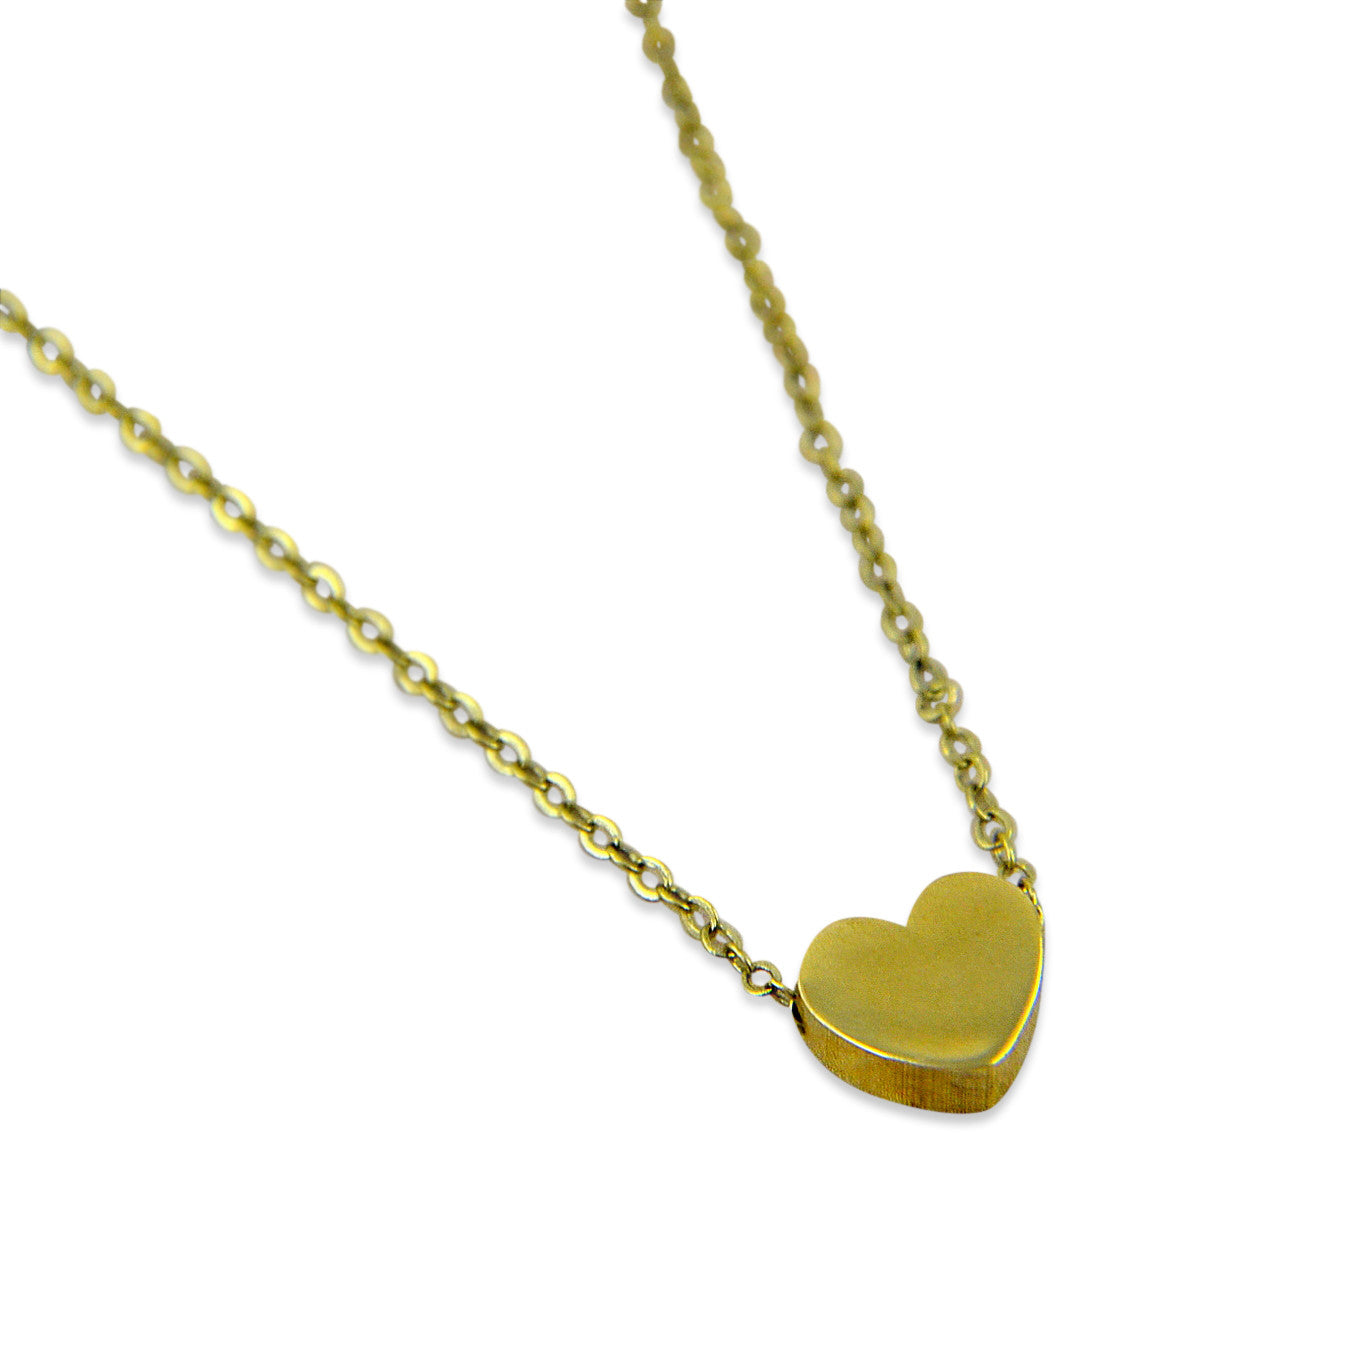 Tiny Heart Necklace - Gwen Delicious Jewelry Designs